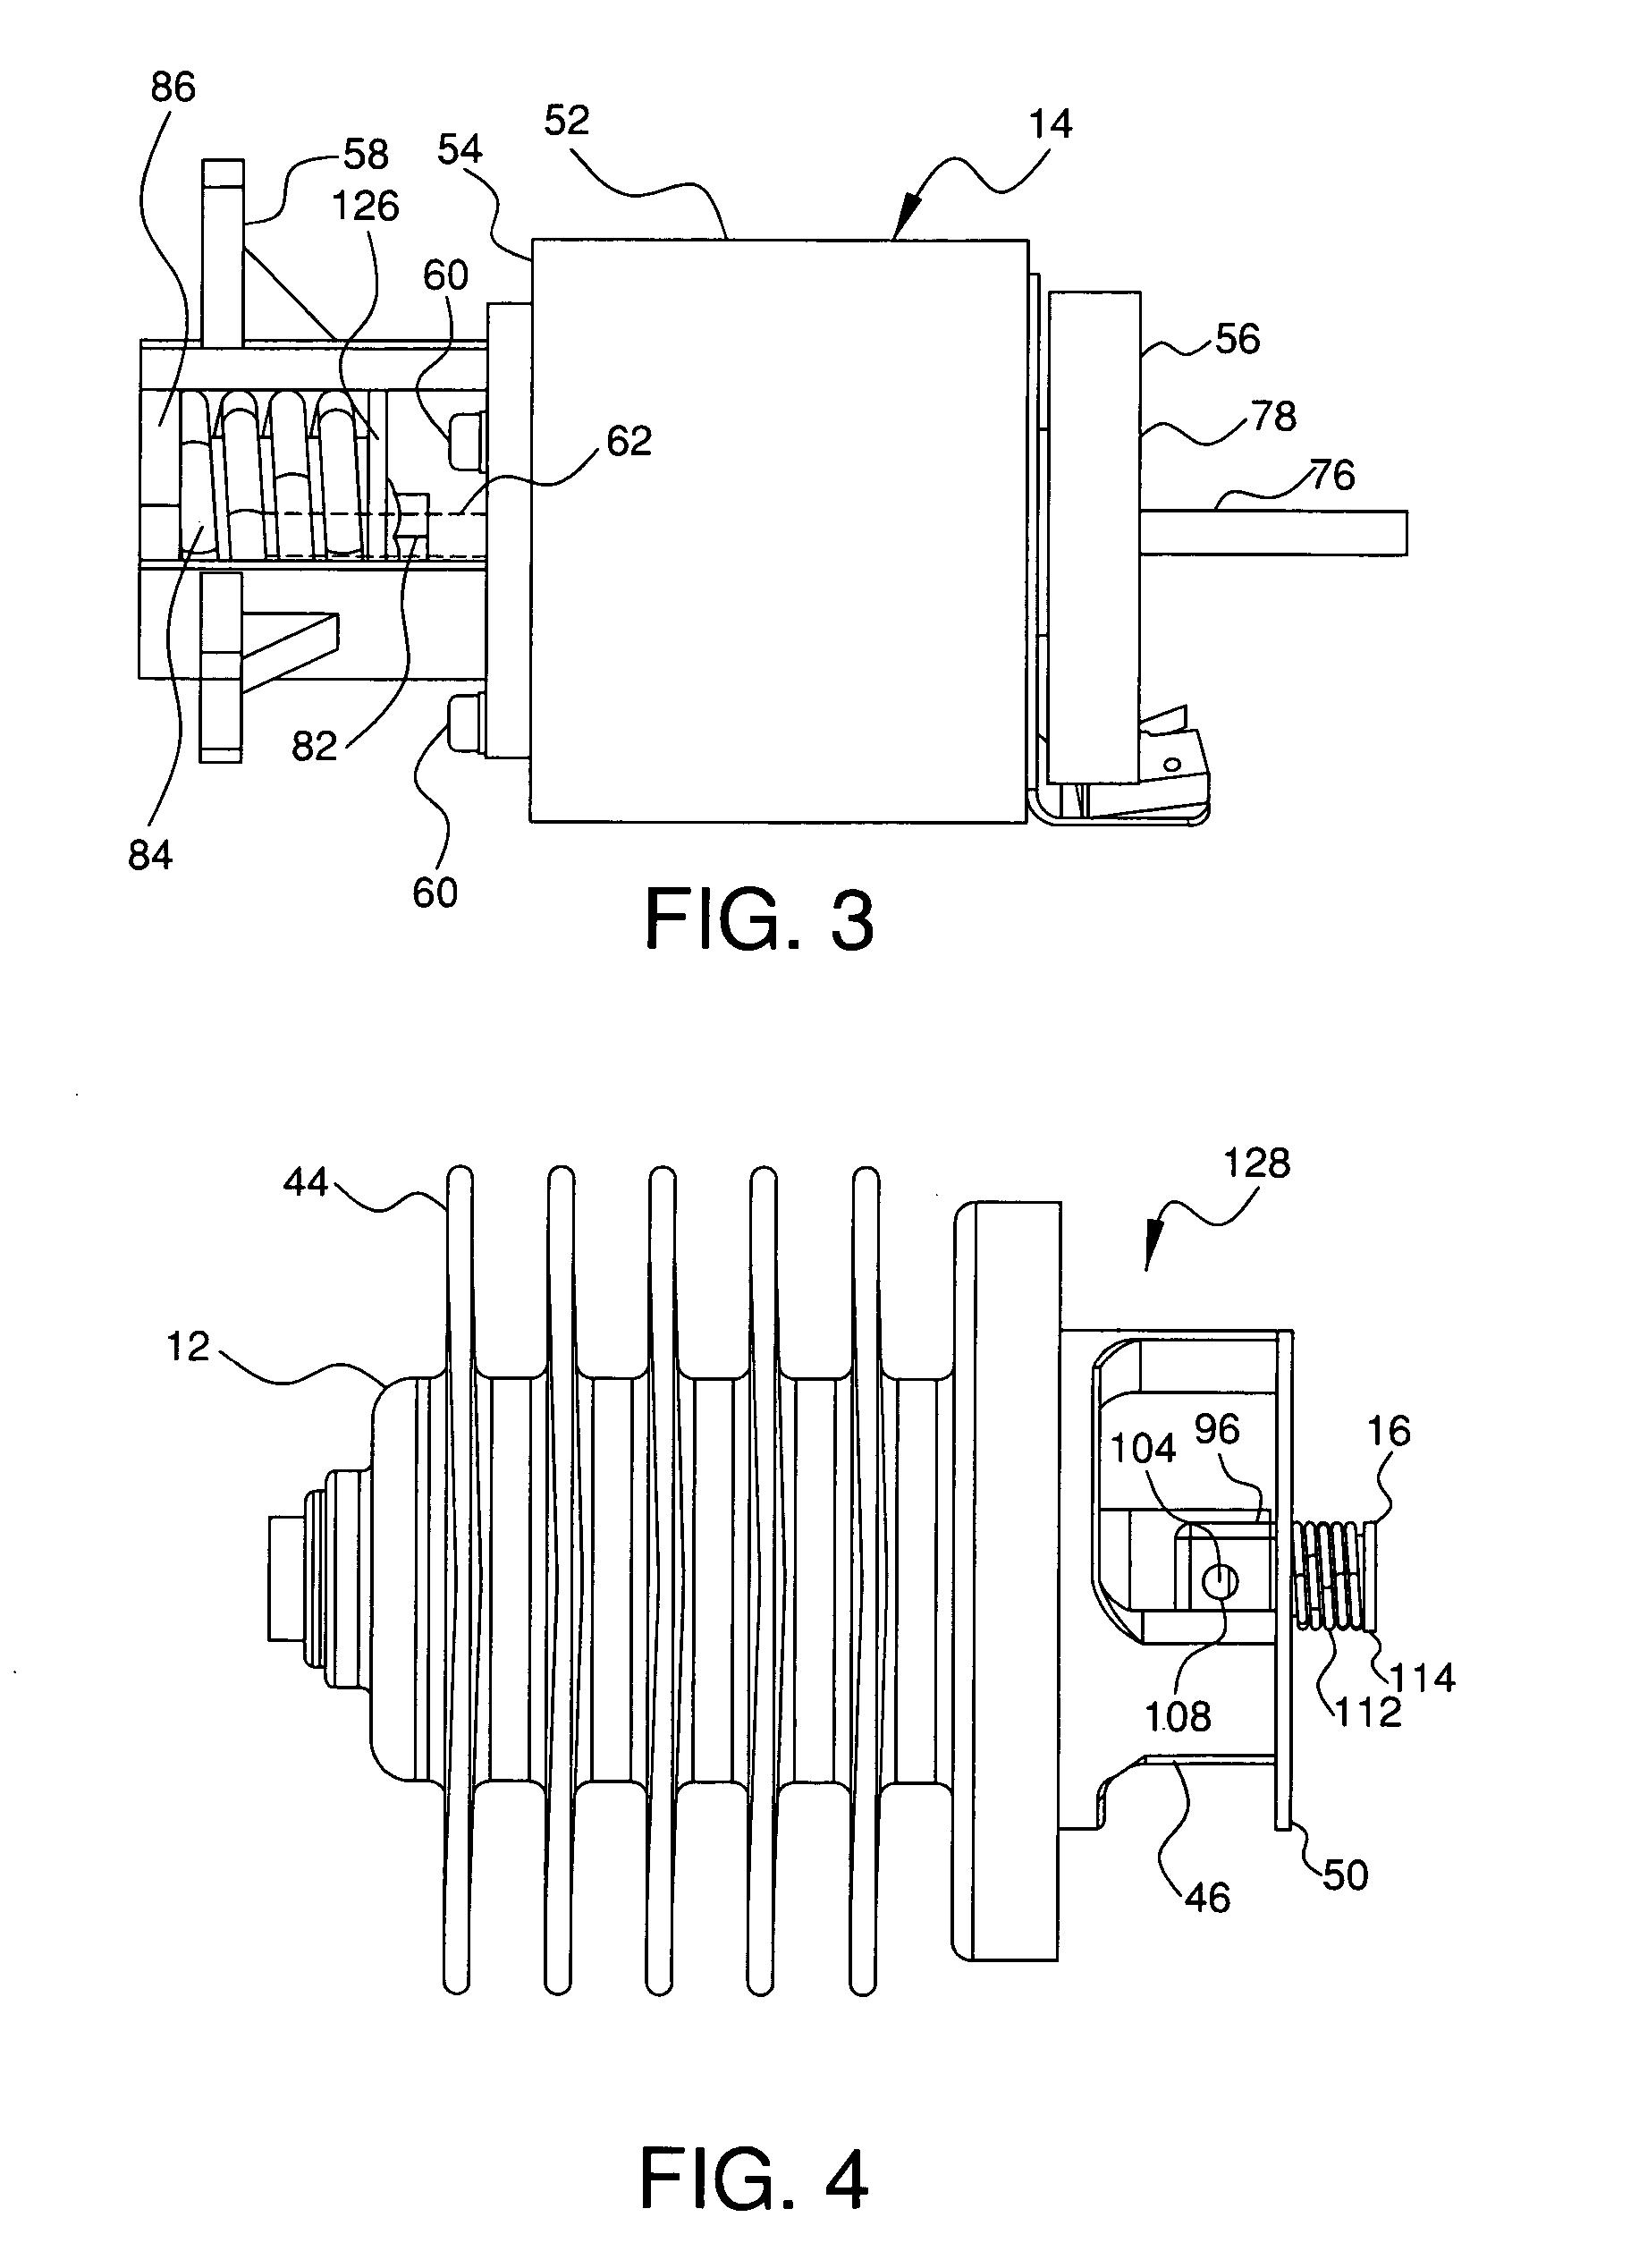 Circuit interrupting device with a turnbuckle and weld break assembly